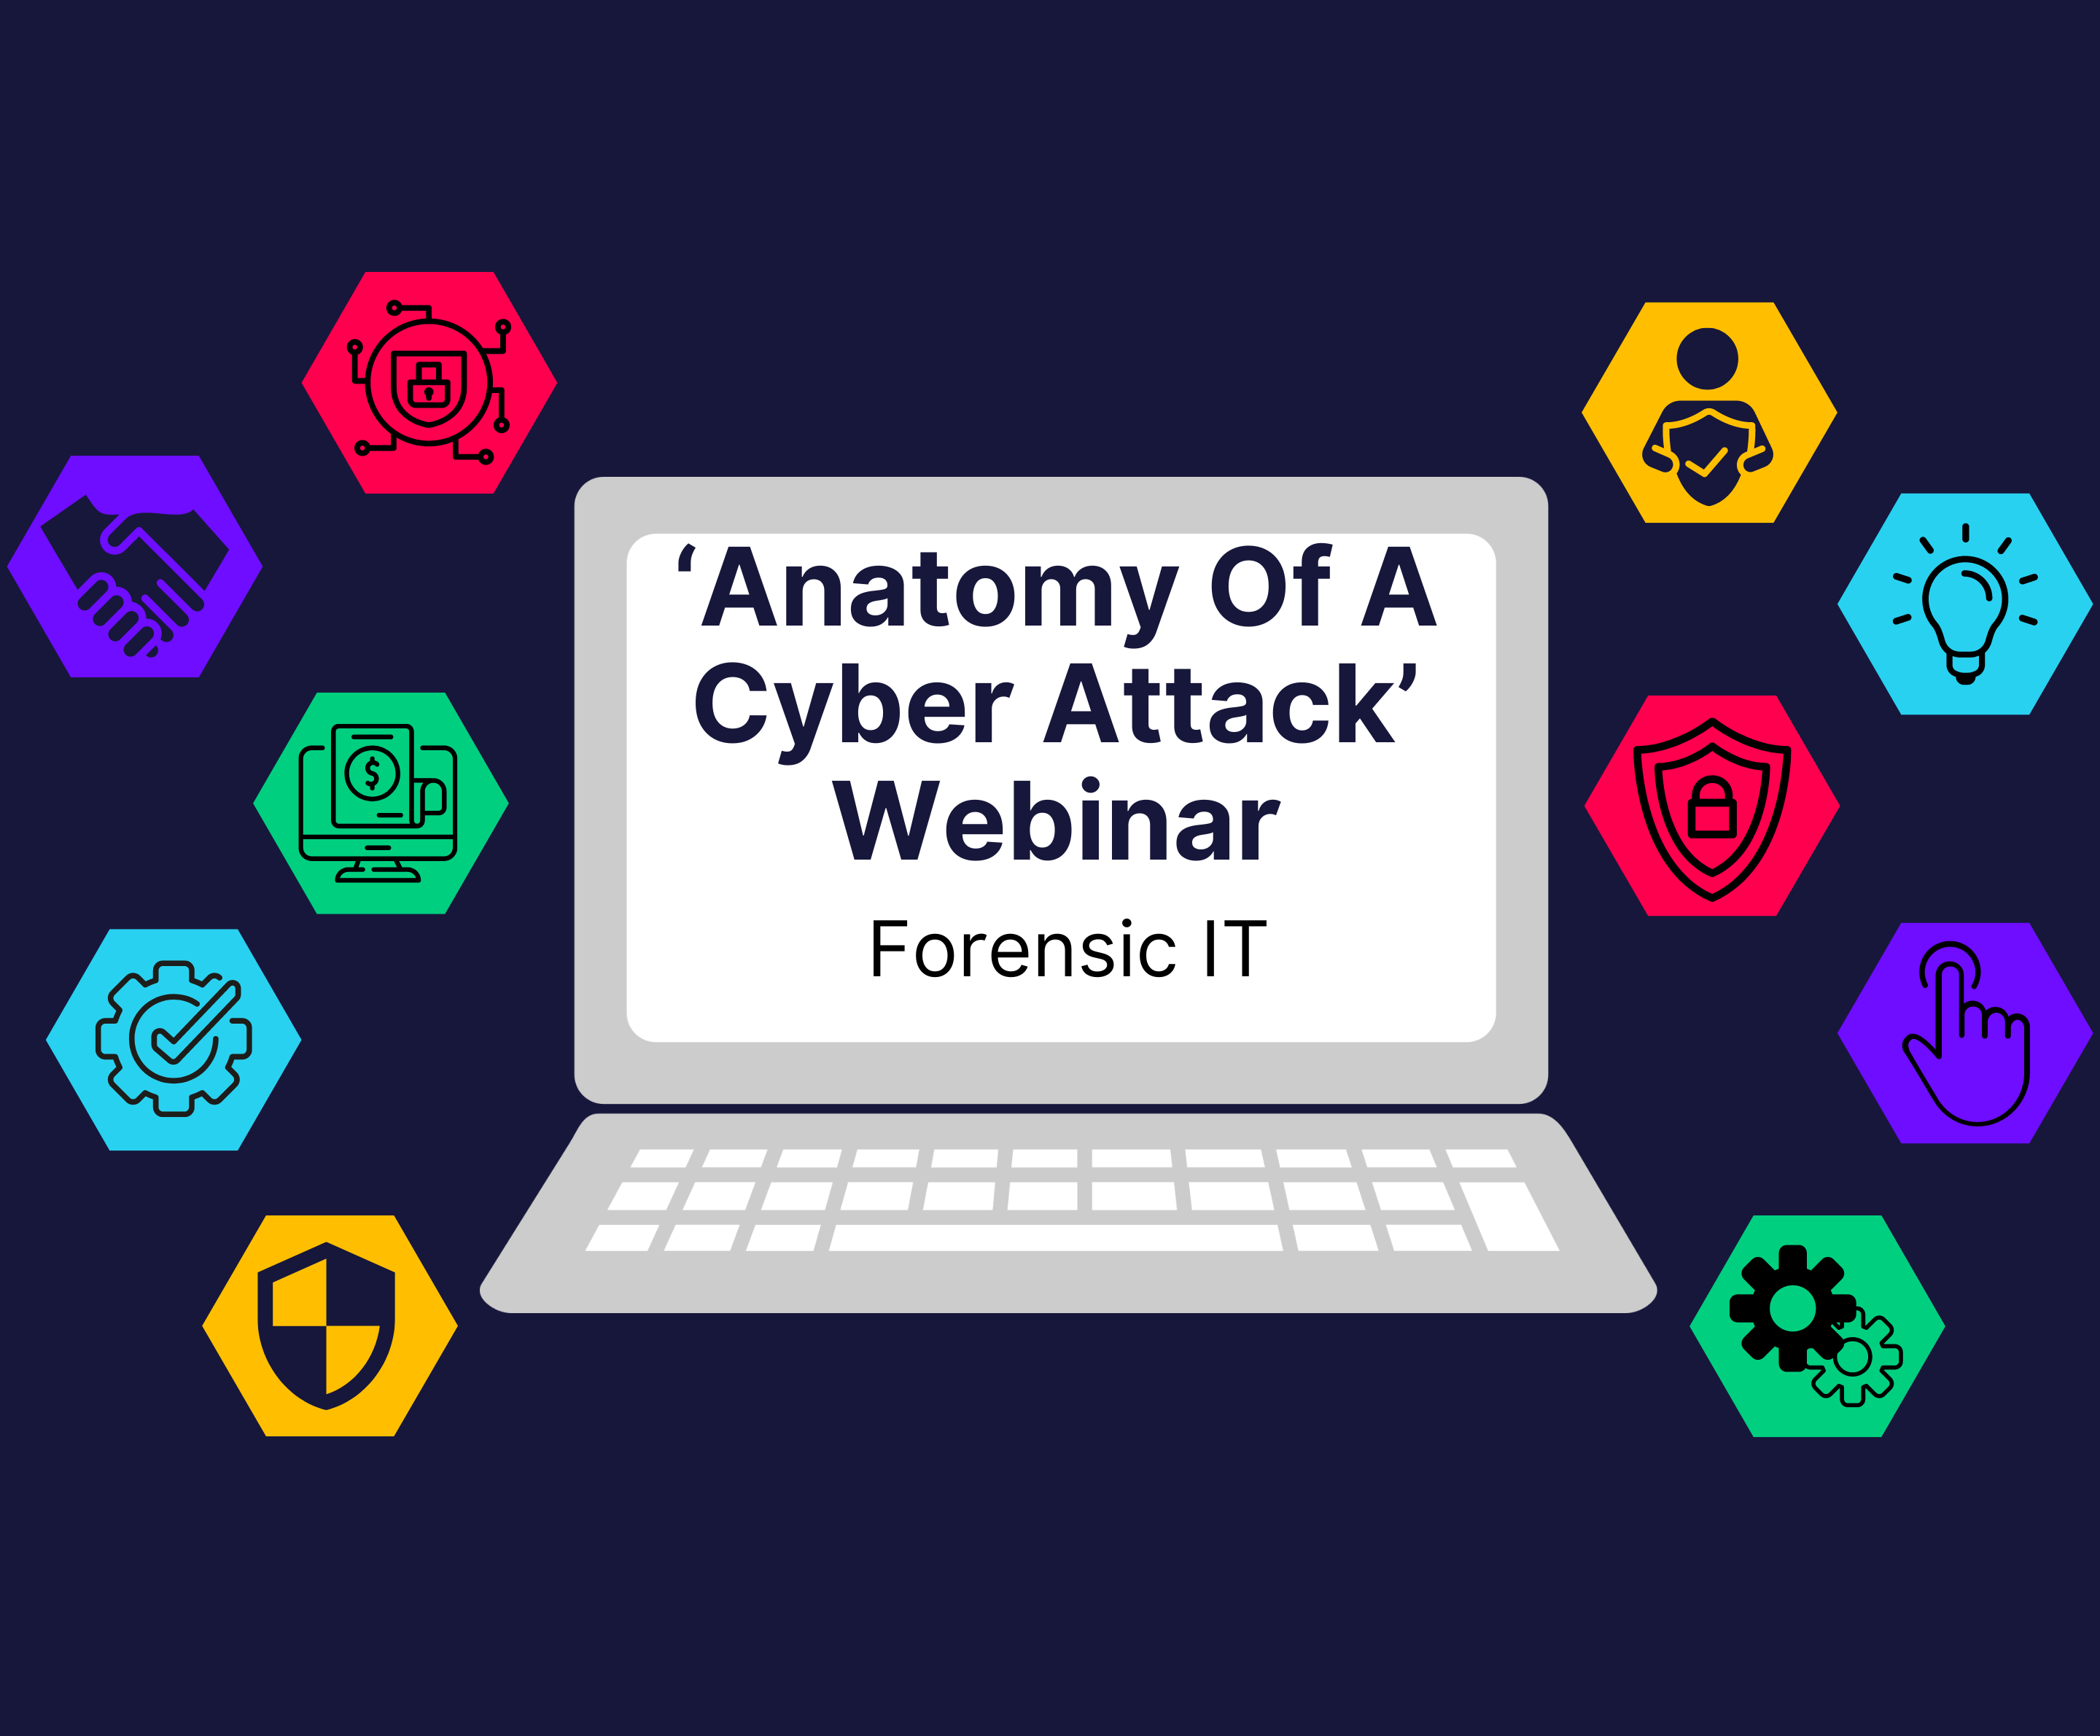 ‘Anatomy Of A Cyber Attack’ Webinar with Forensic IT